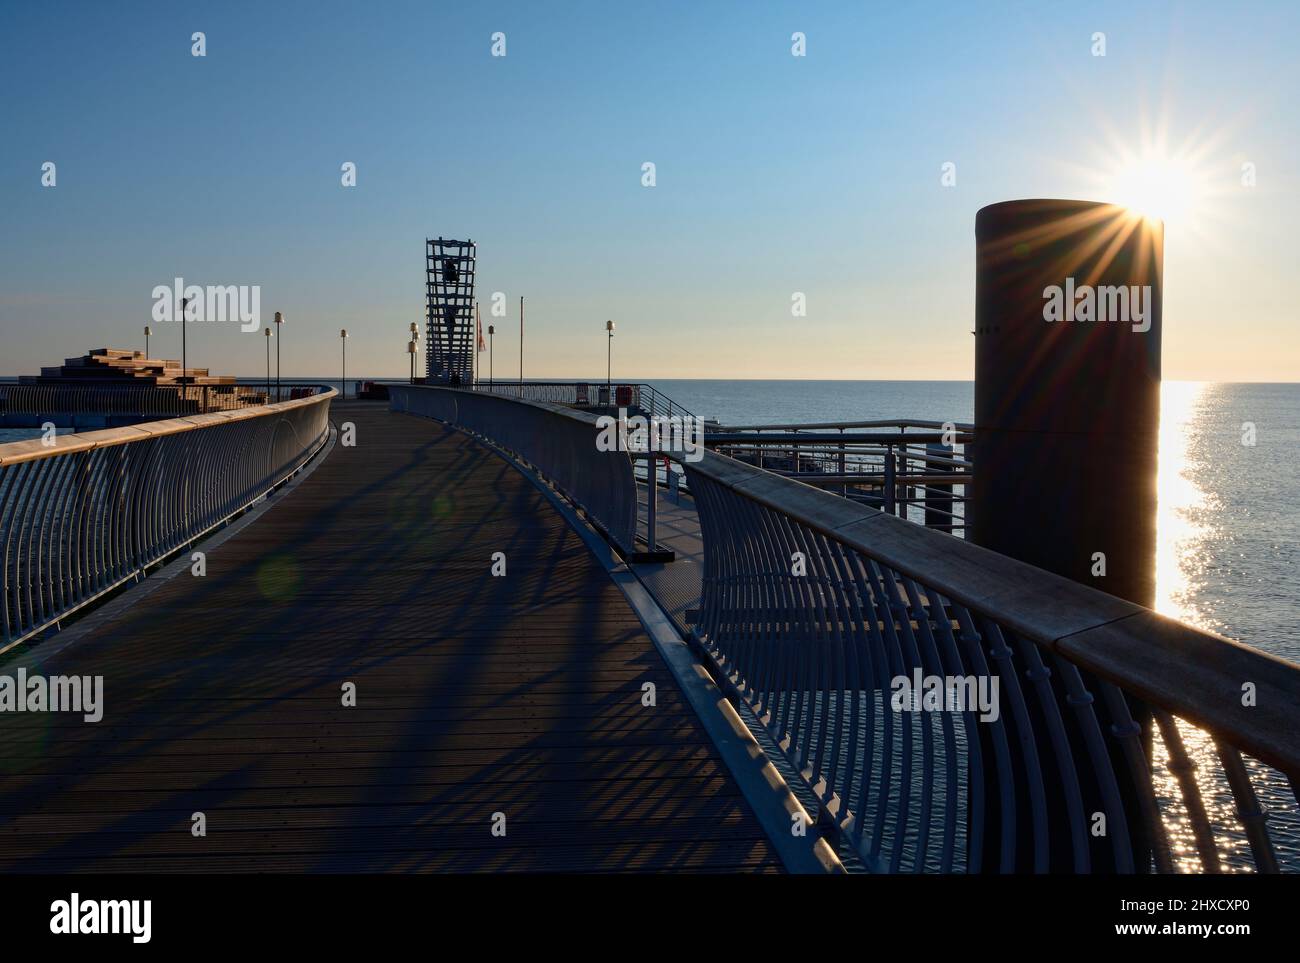 The new pier in Koserow at sunrise Stock Photo